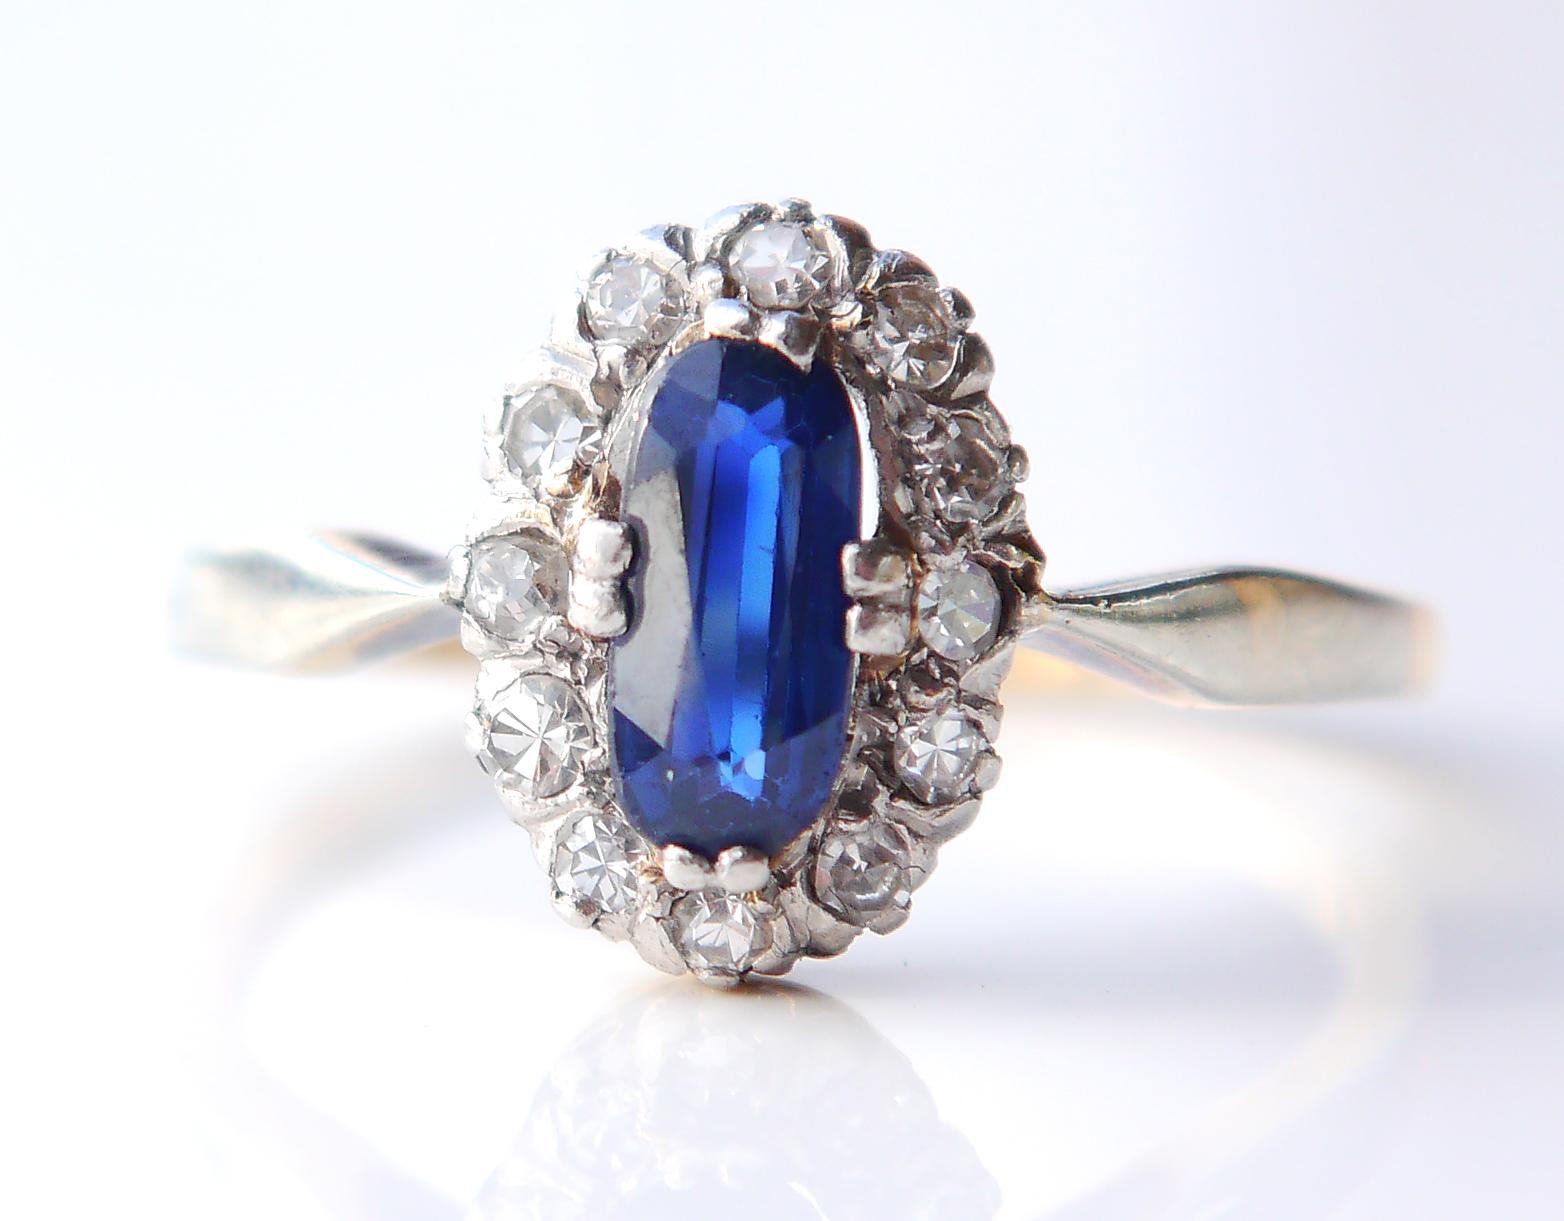 Halo ring featuring oval cut natural Blue Sapphire and 12 old European diamond cut diamonds mounted into White Gold or Platinum clusters. All stones have open backs. Hallmarked 585 , European, likely German made ca.1920s -1930s.

The crown is 12 mm